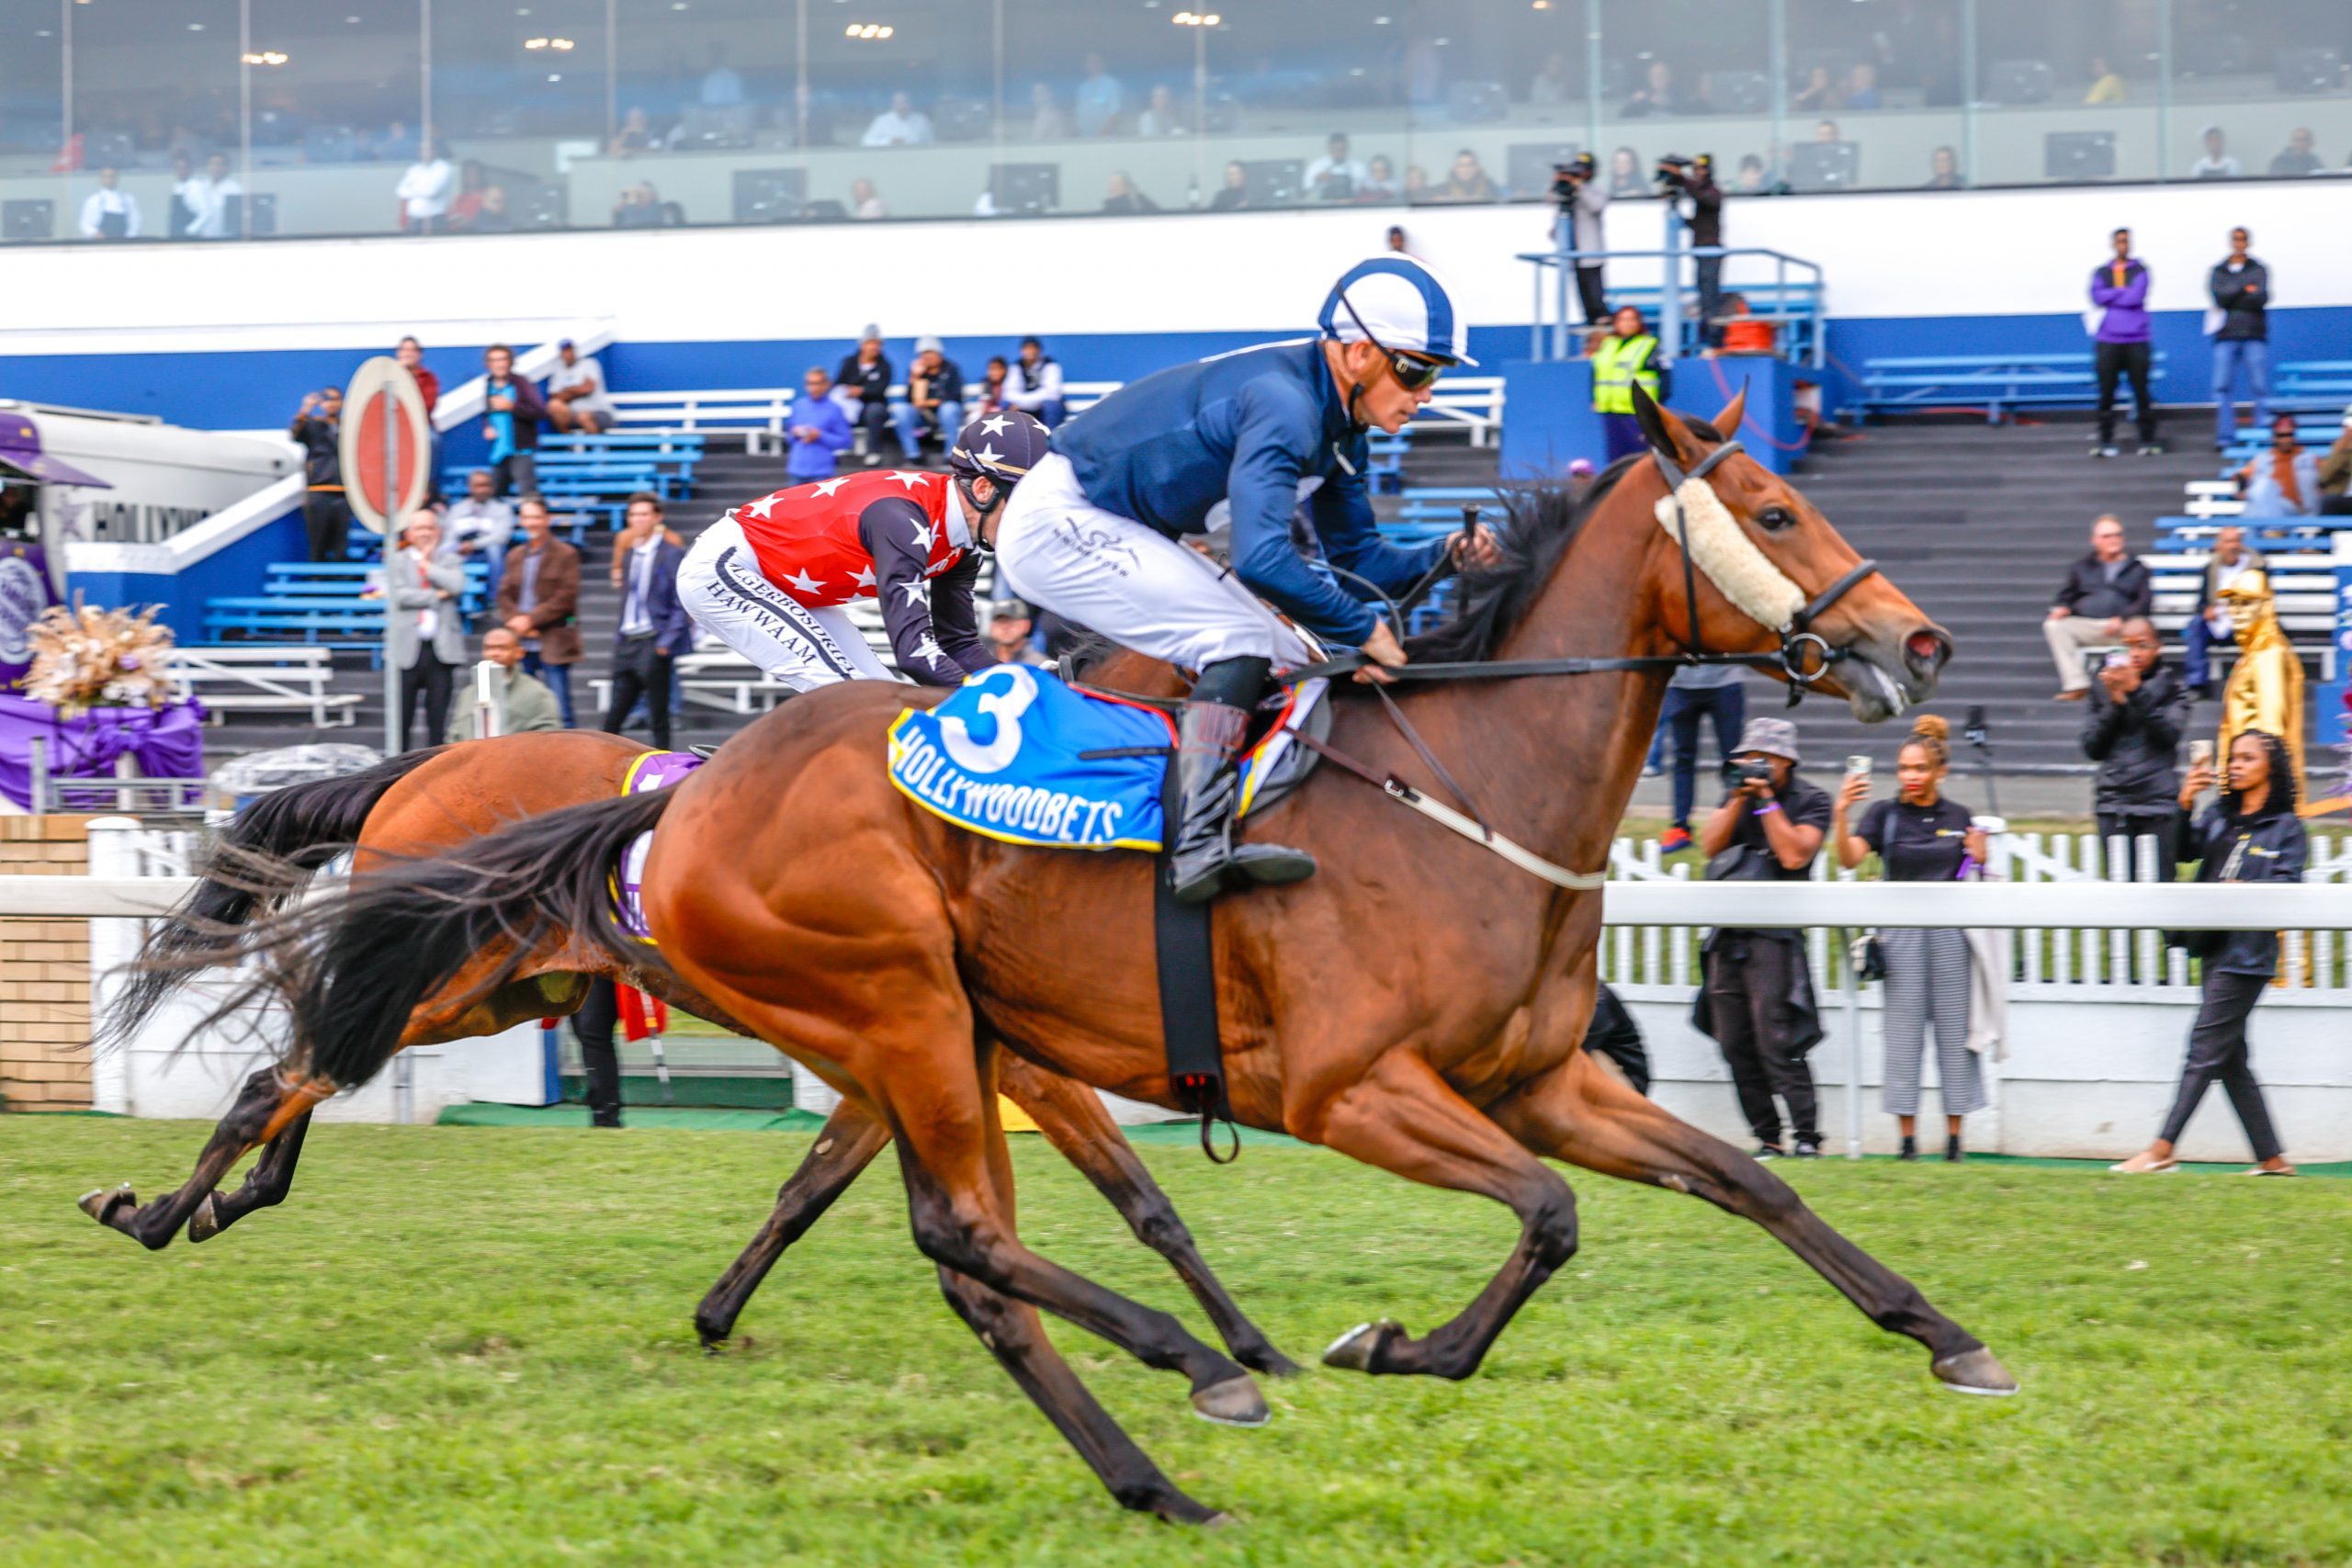 Richard Fourie produced a perfectly judged ride to get the best out of Whistle The Tune